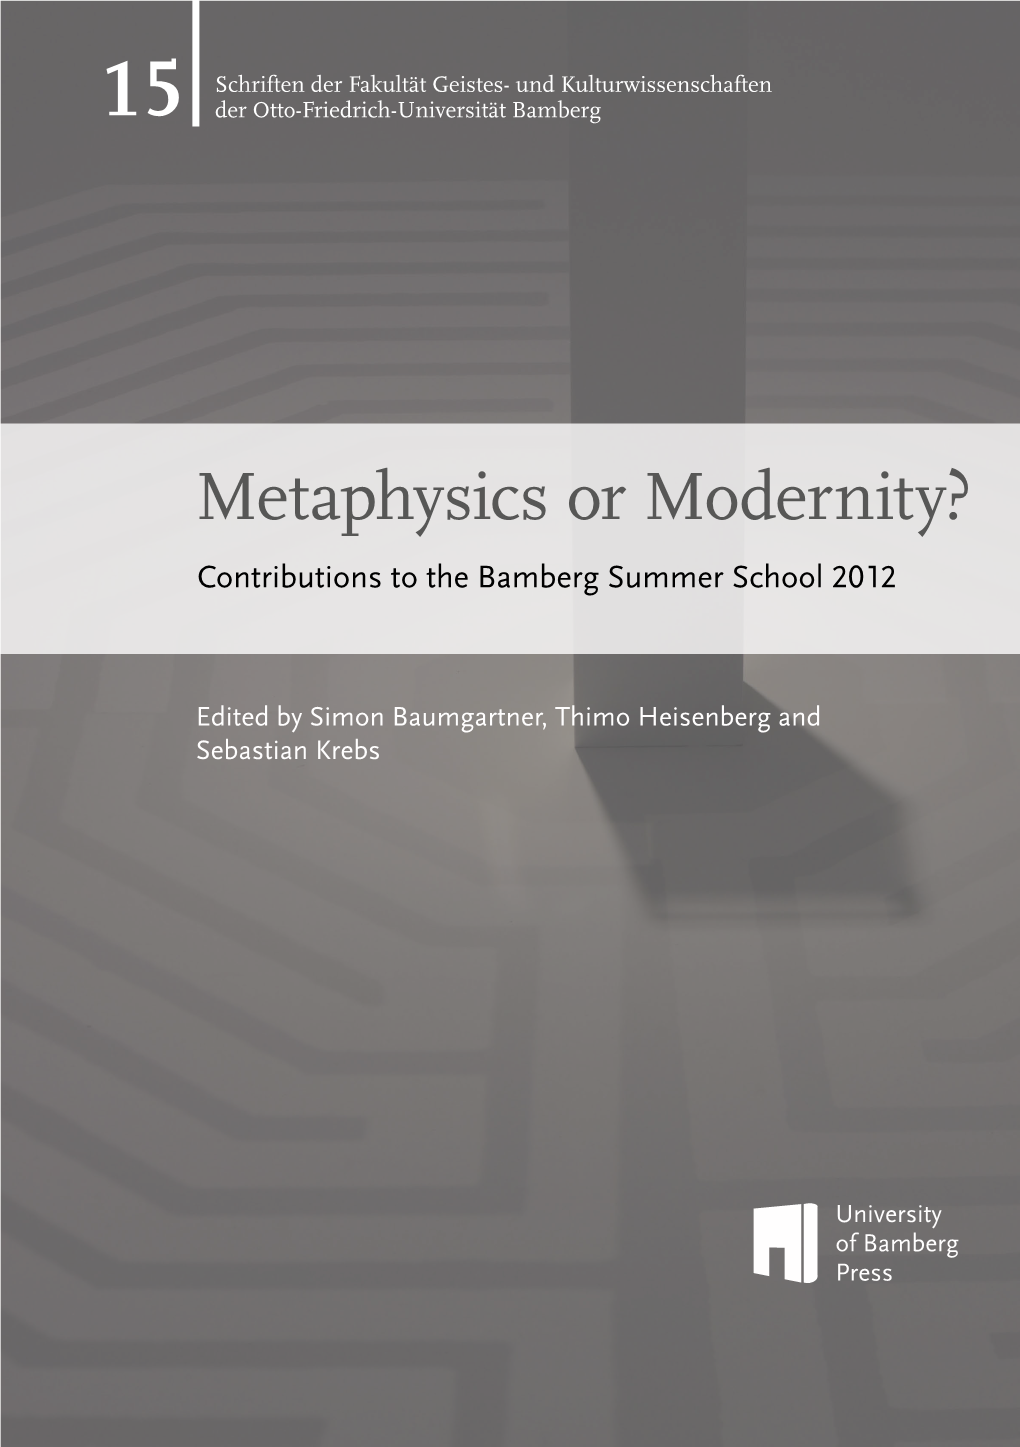 Metaphysics Or Modernity? Contributions to the Bamberg Summer School 2012